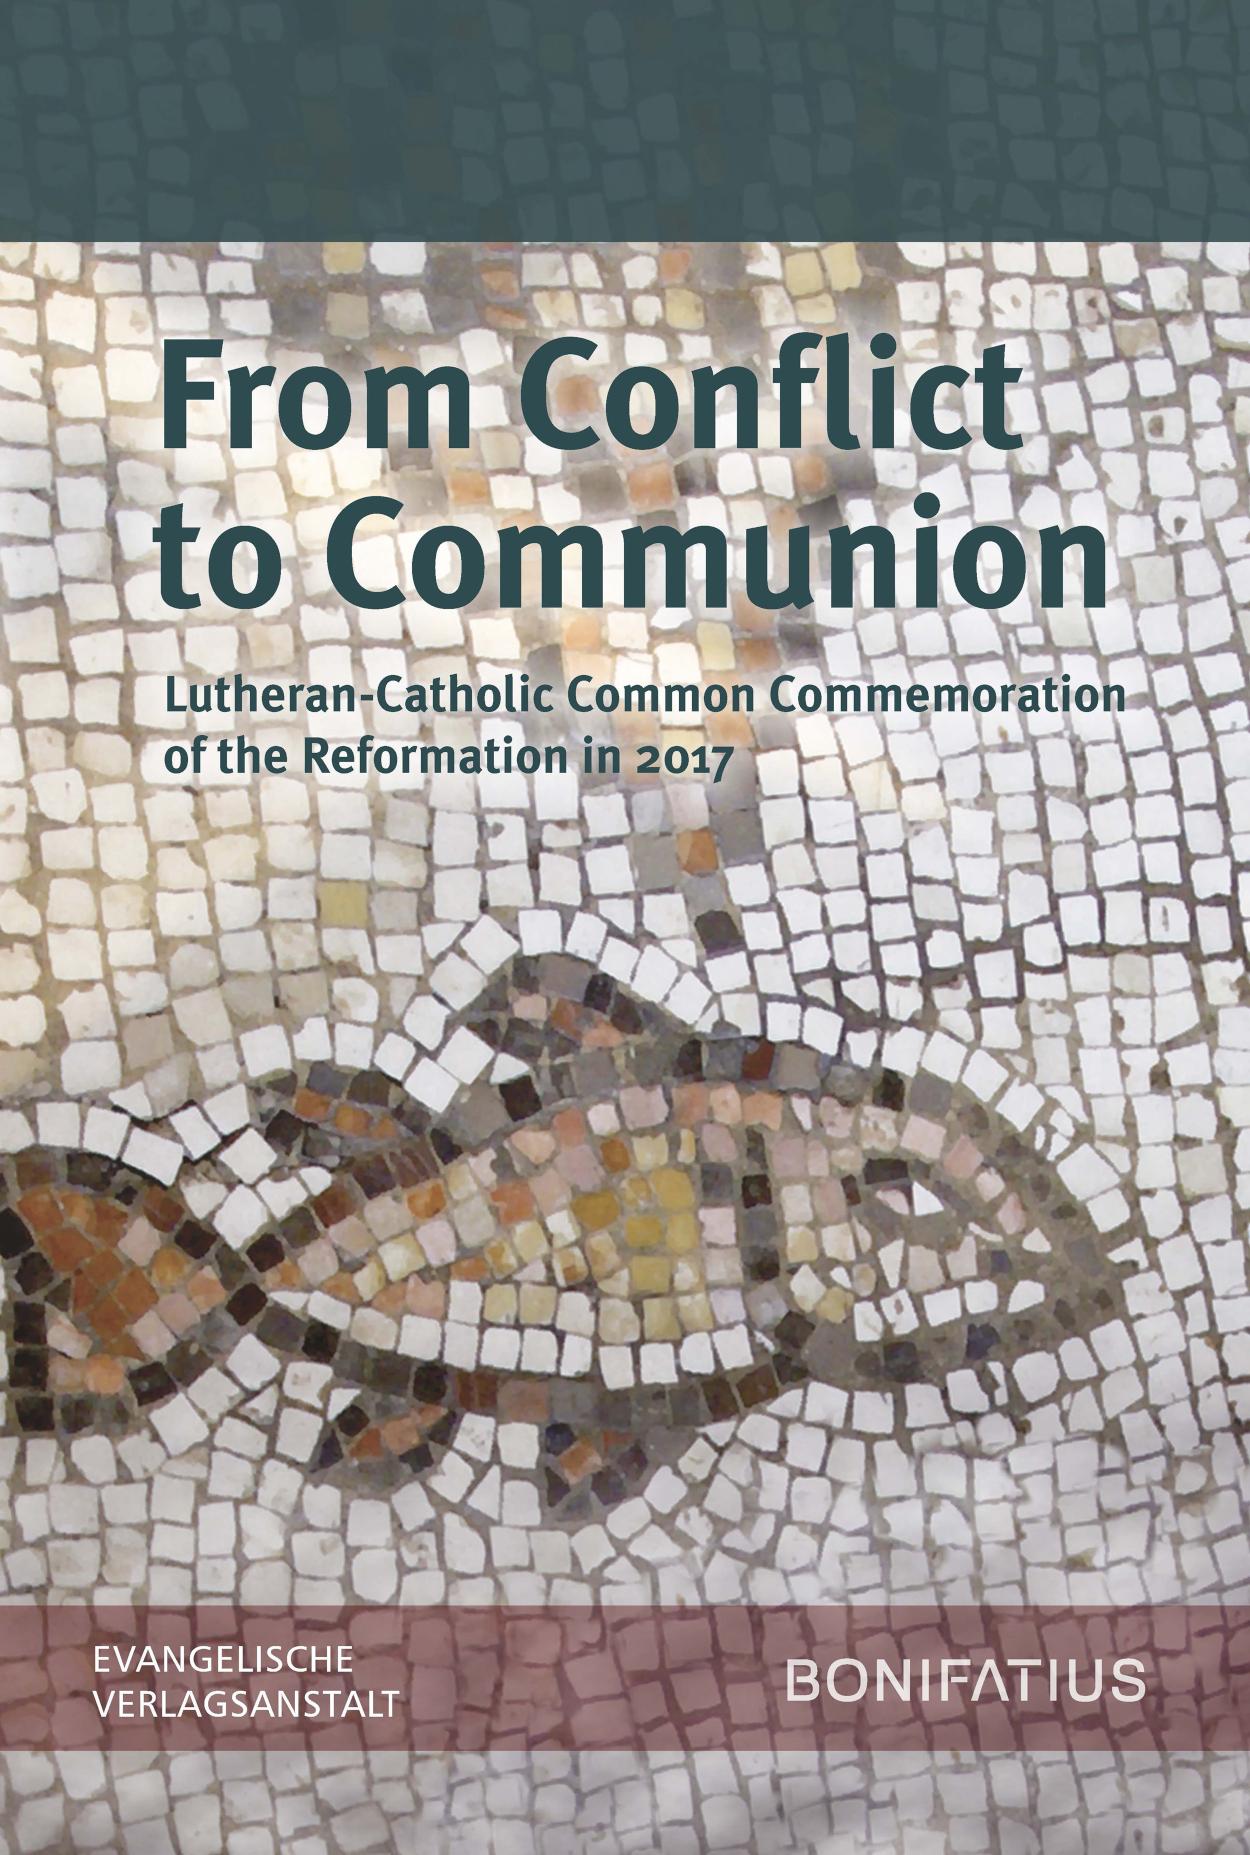 From Conflict to Communion - Including Common Prayer Lutheran-Catholic Common Commemoration of the Reformation in 2017 Report of the Lutheran-Roman Catholic Commission on Unity